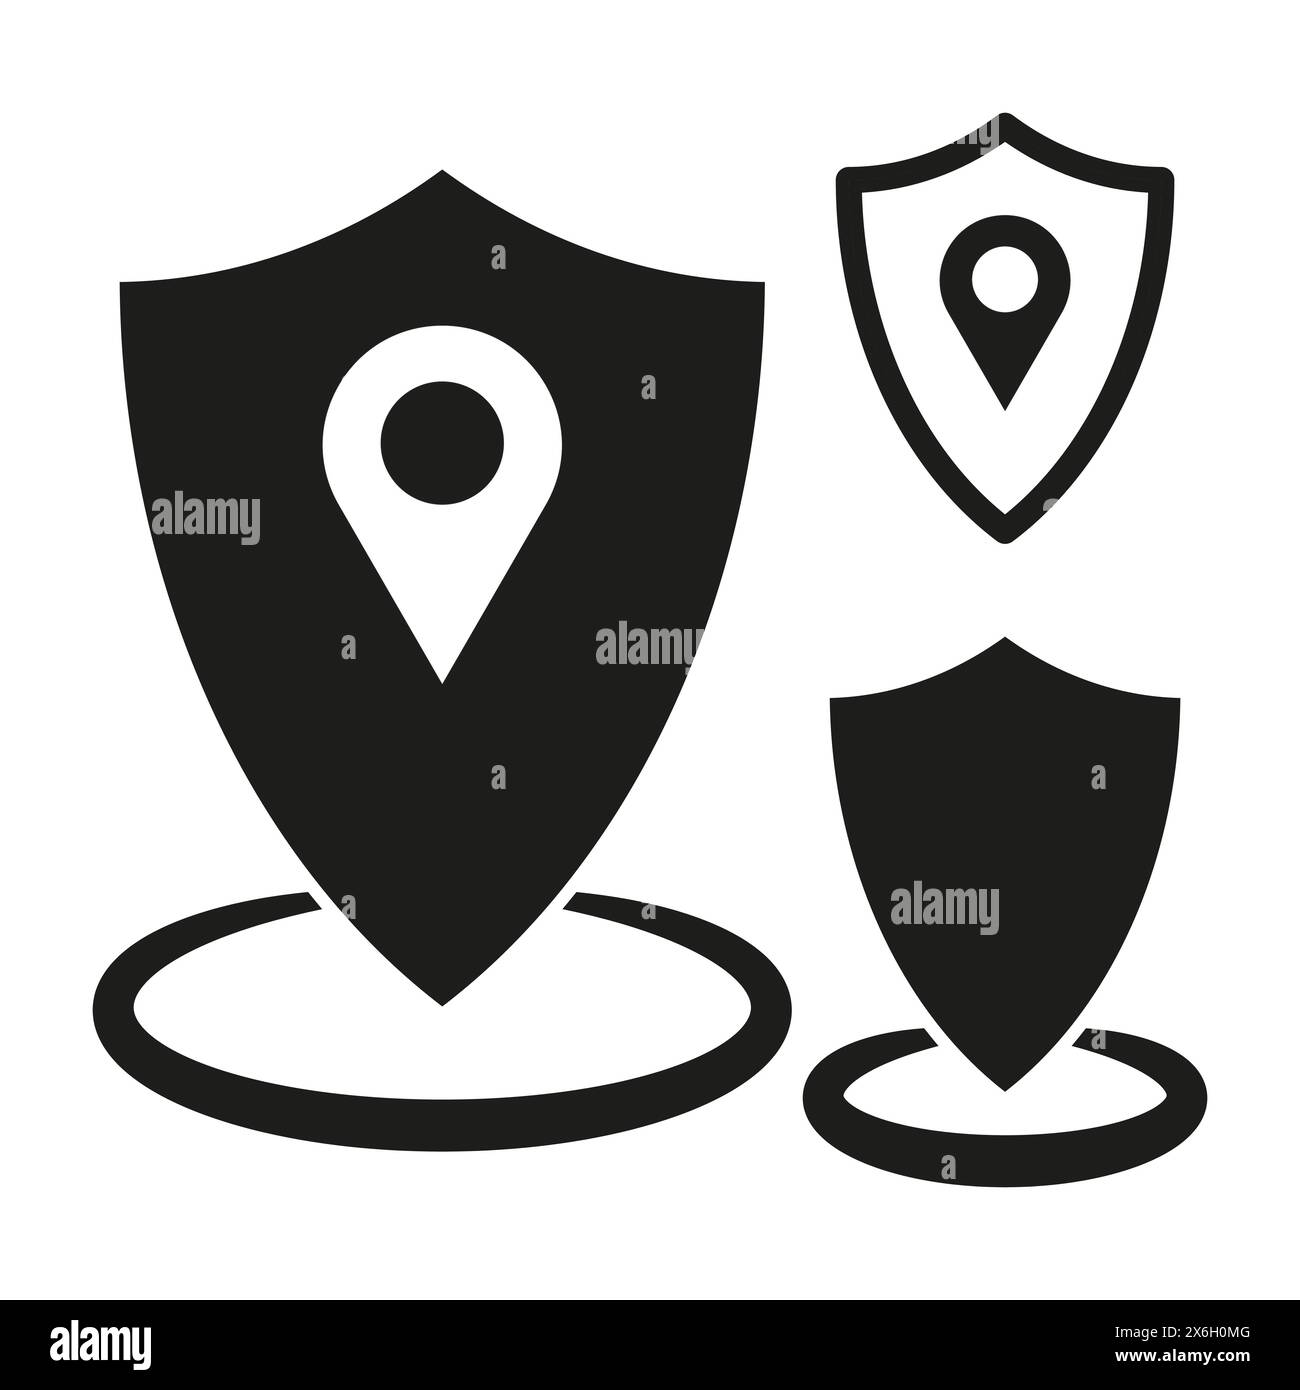 Location protection icons. Privacy shields with pin. Secure placement symbols. Geolocation safety signs. Vector illustration. EPS 10. Stock Vector